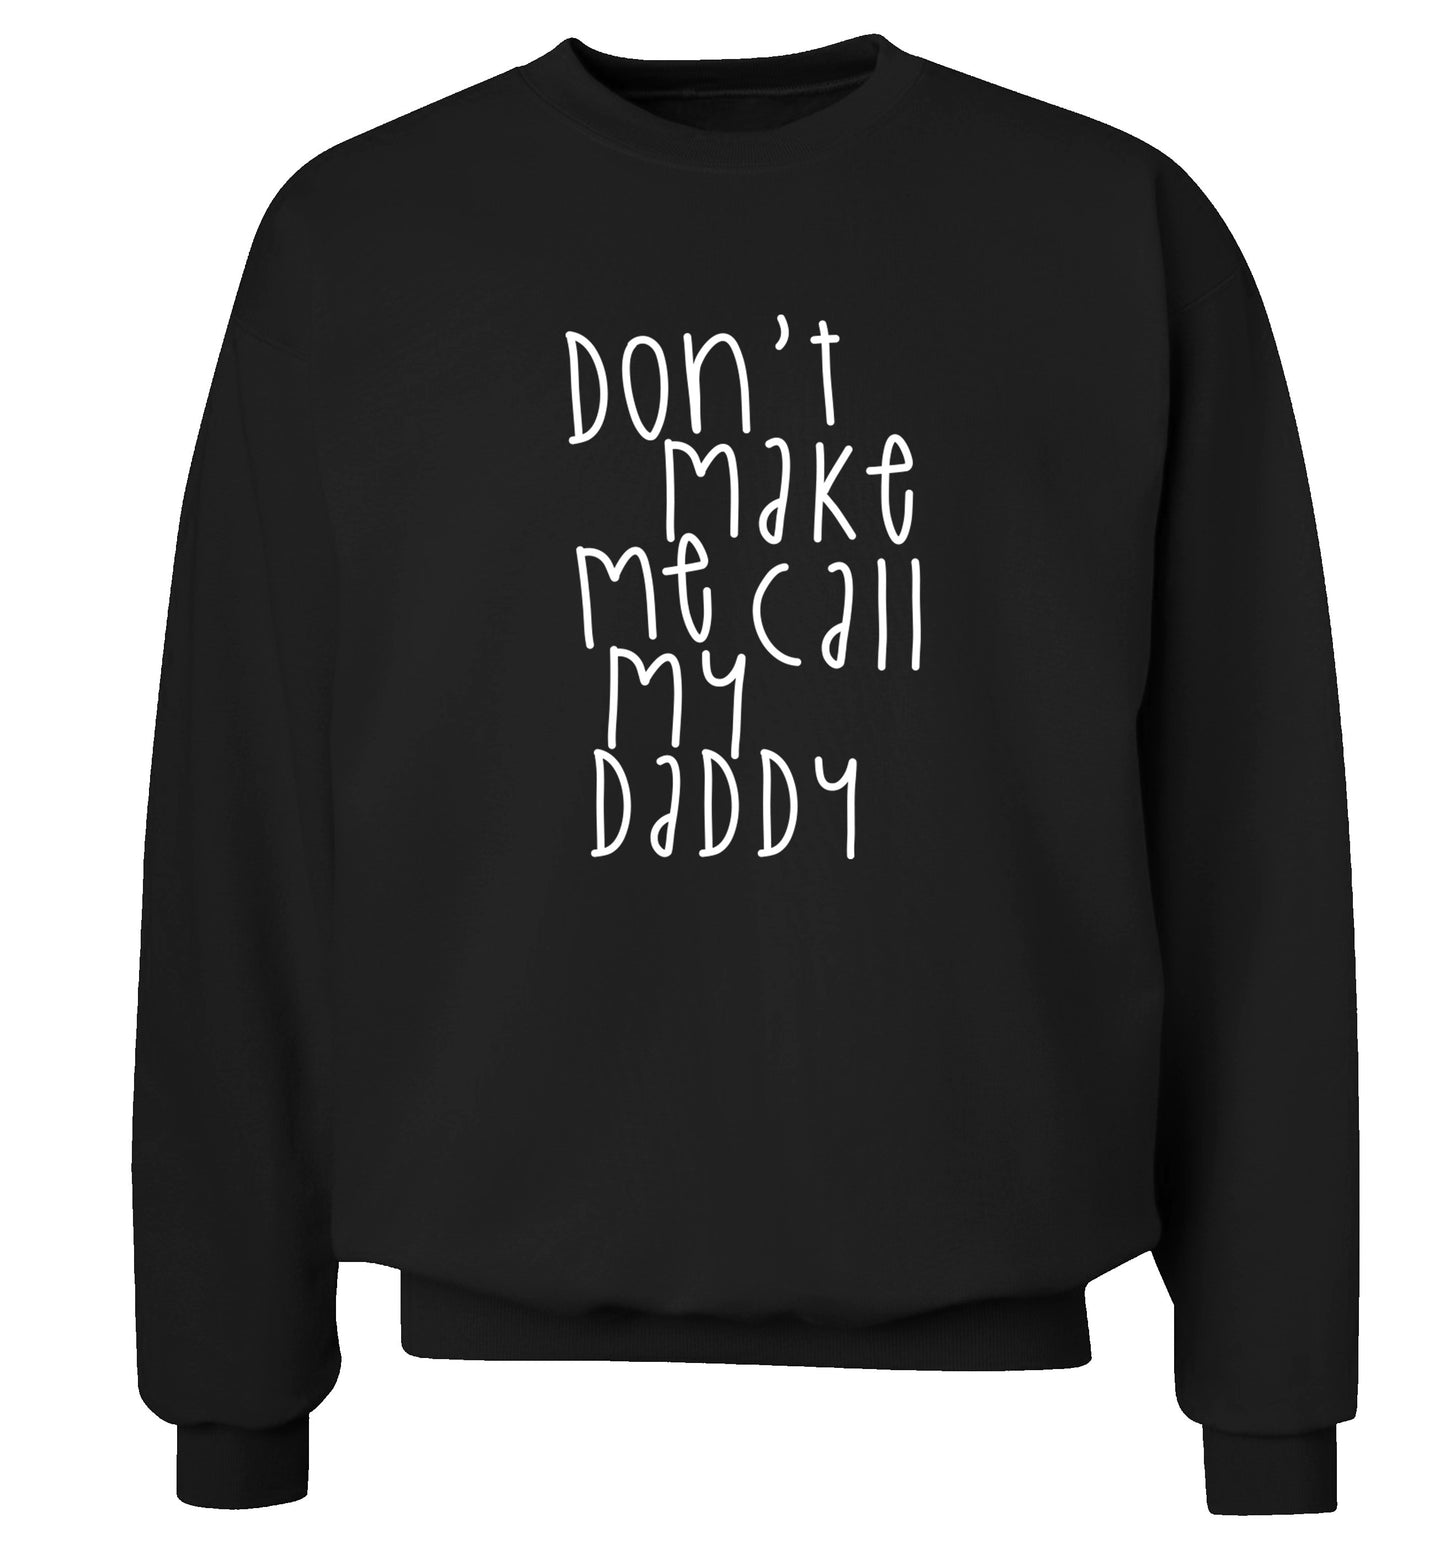 Don't make me call my daddy Adult's unisex black Sweater 2XL